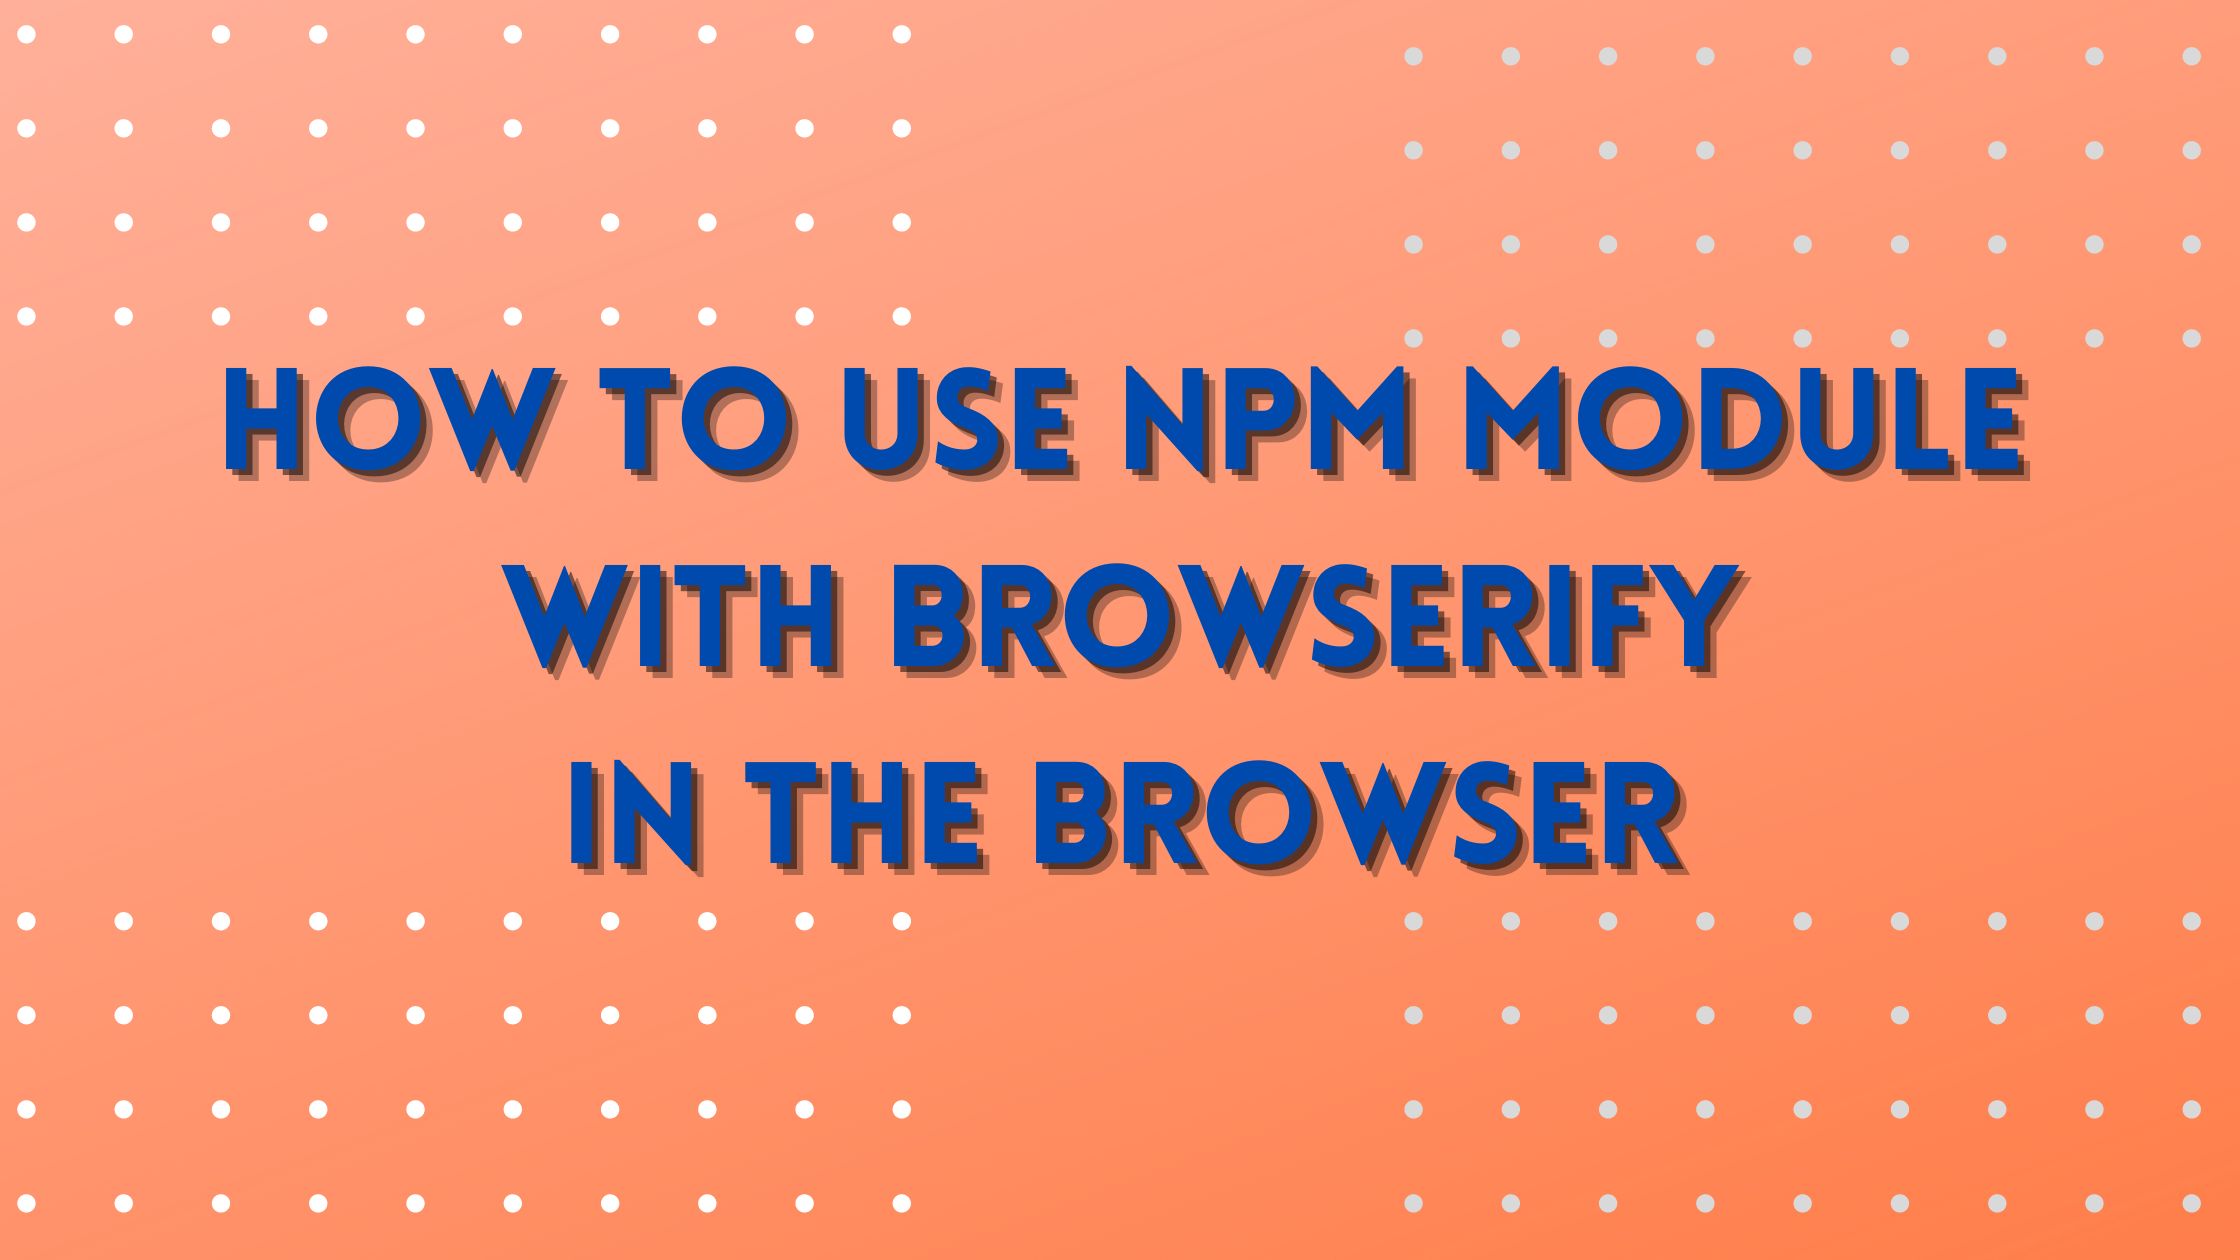 How to use NPM module with Browserify in the browser